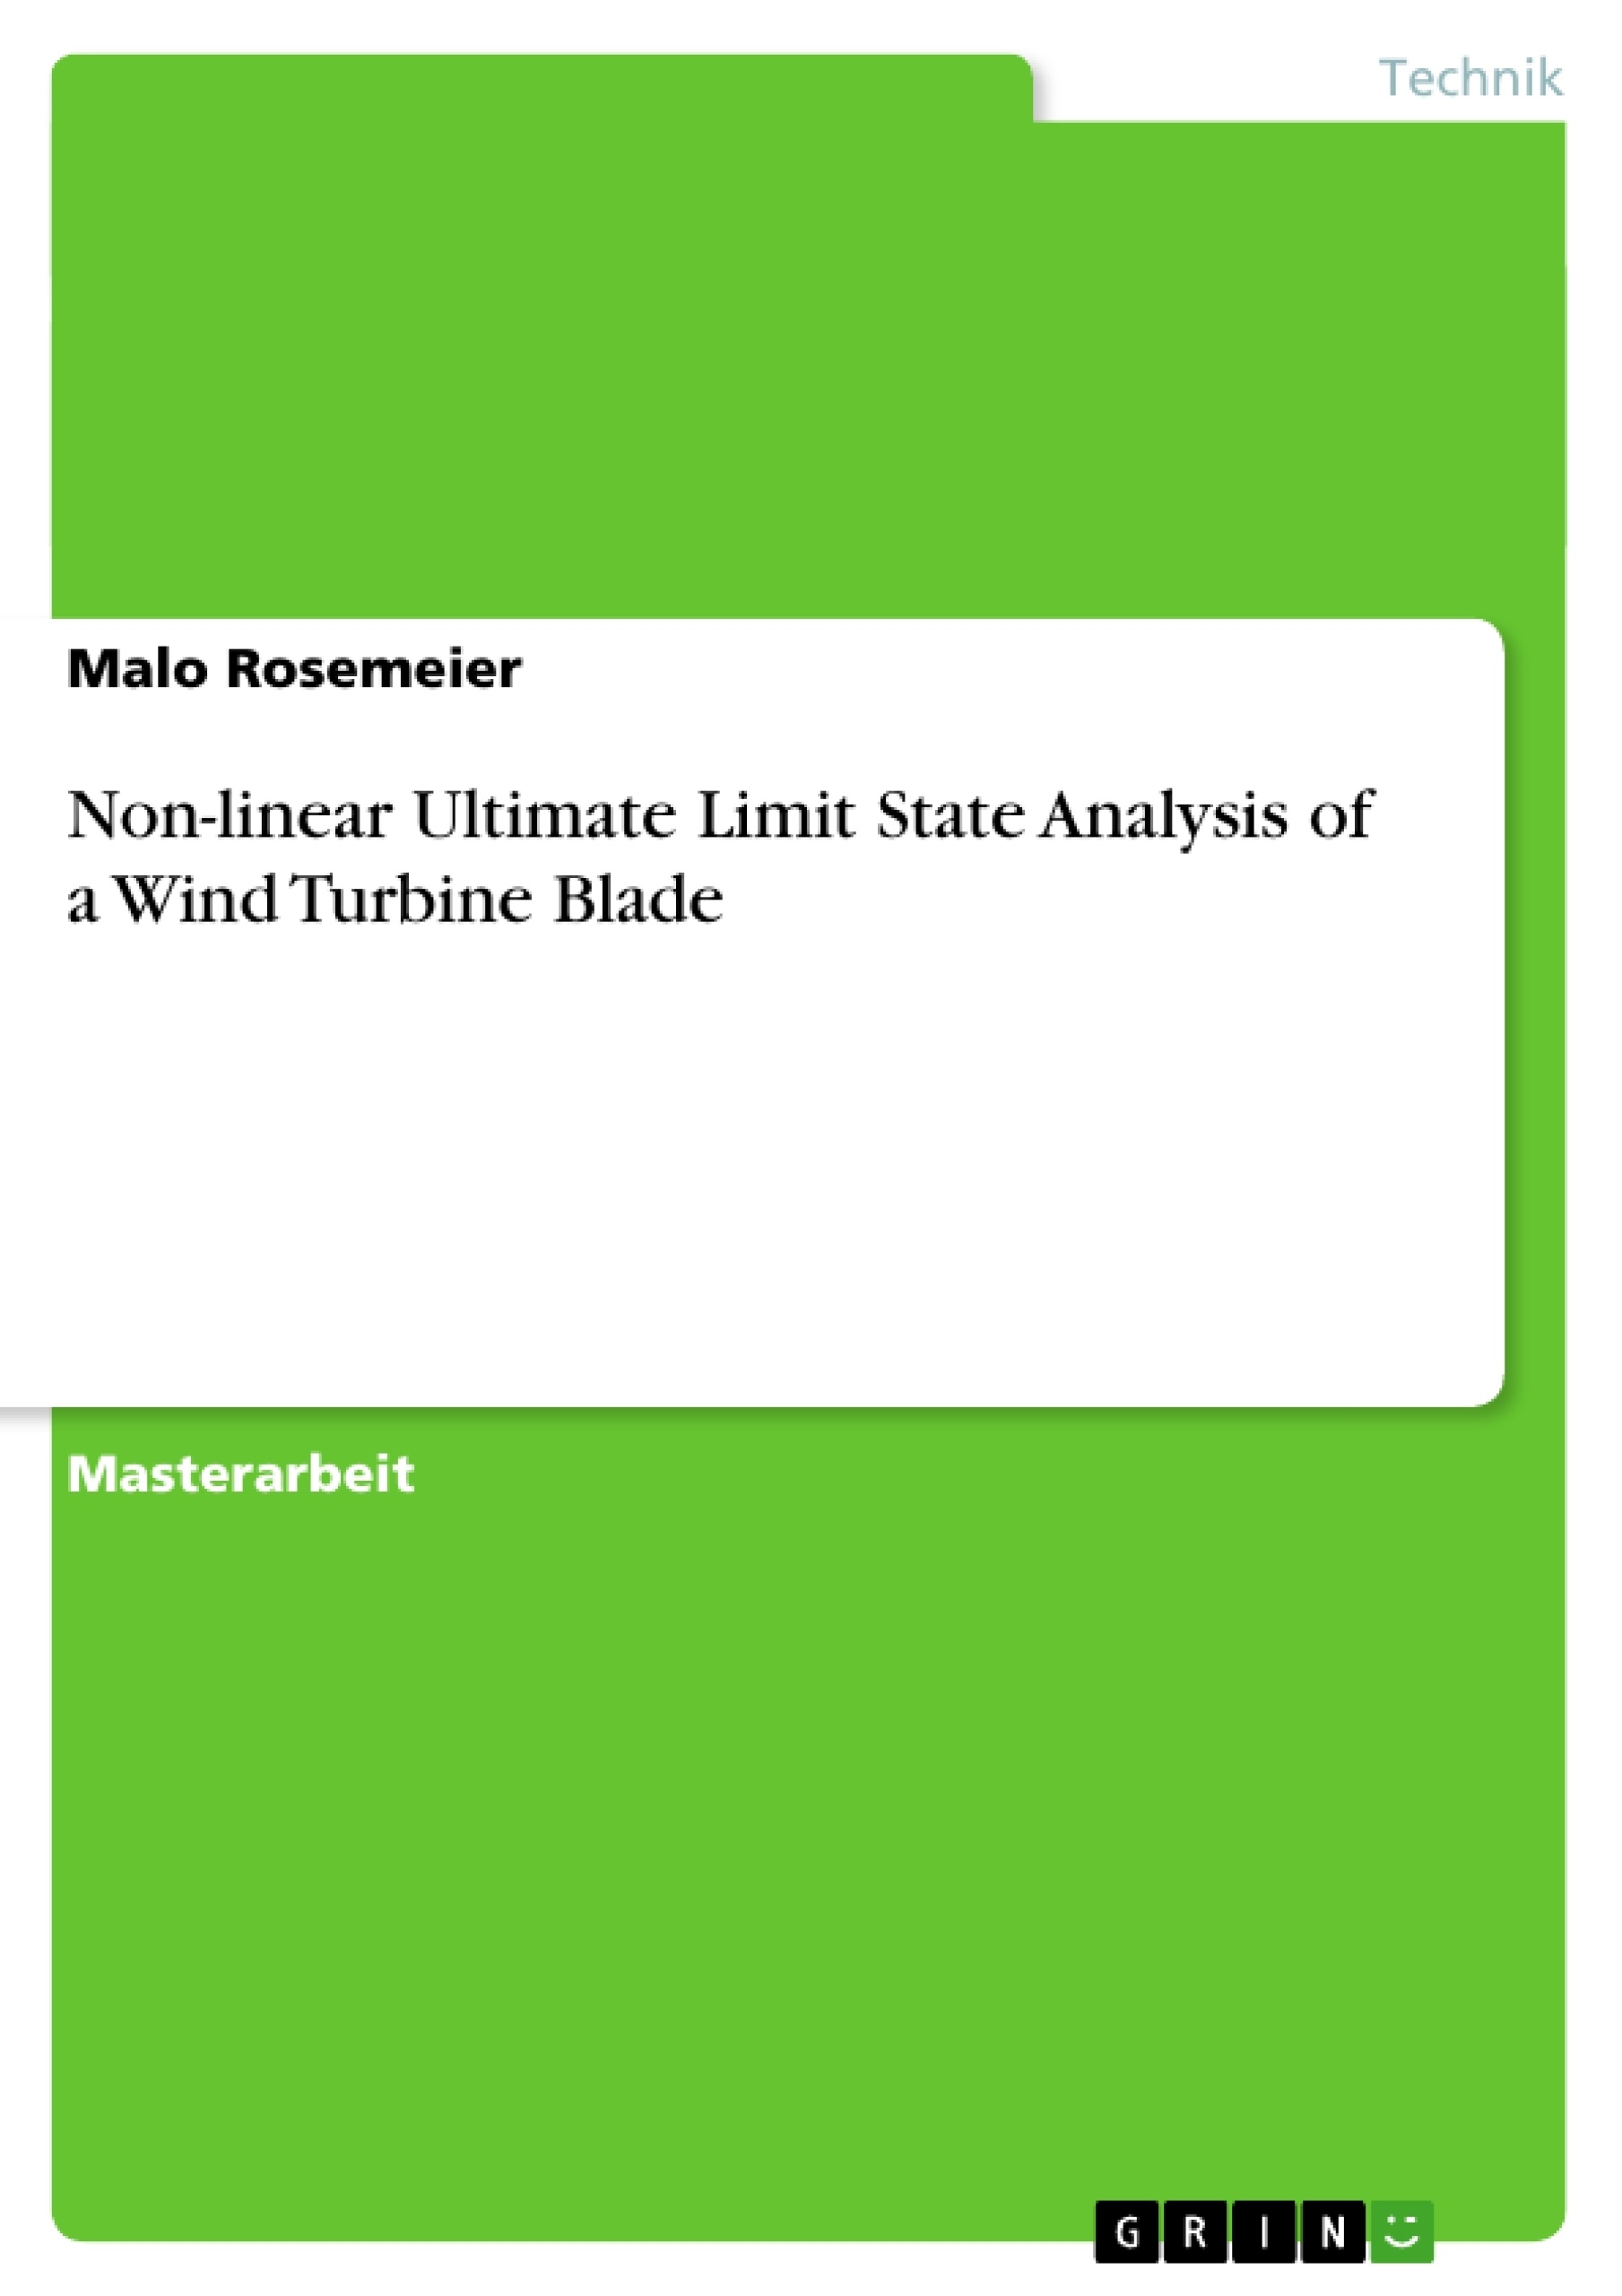 Titre: Non-linear Ultimate Limit State Analysis of a Wind Turbine Blade